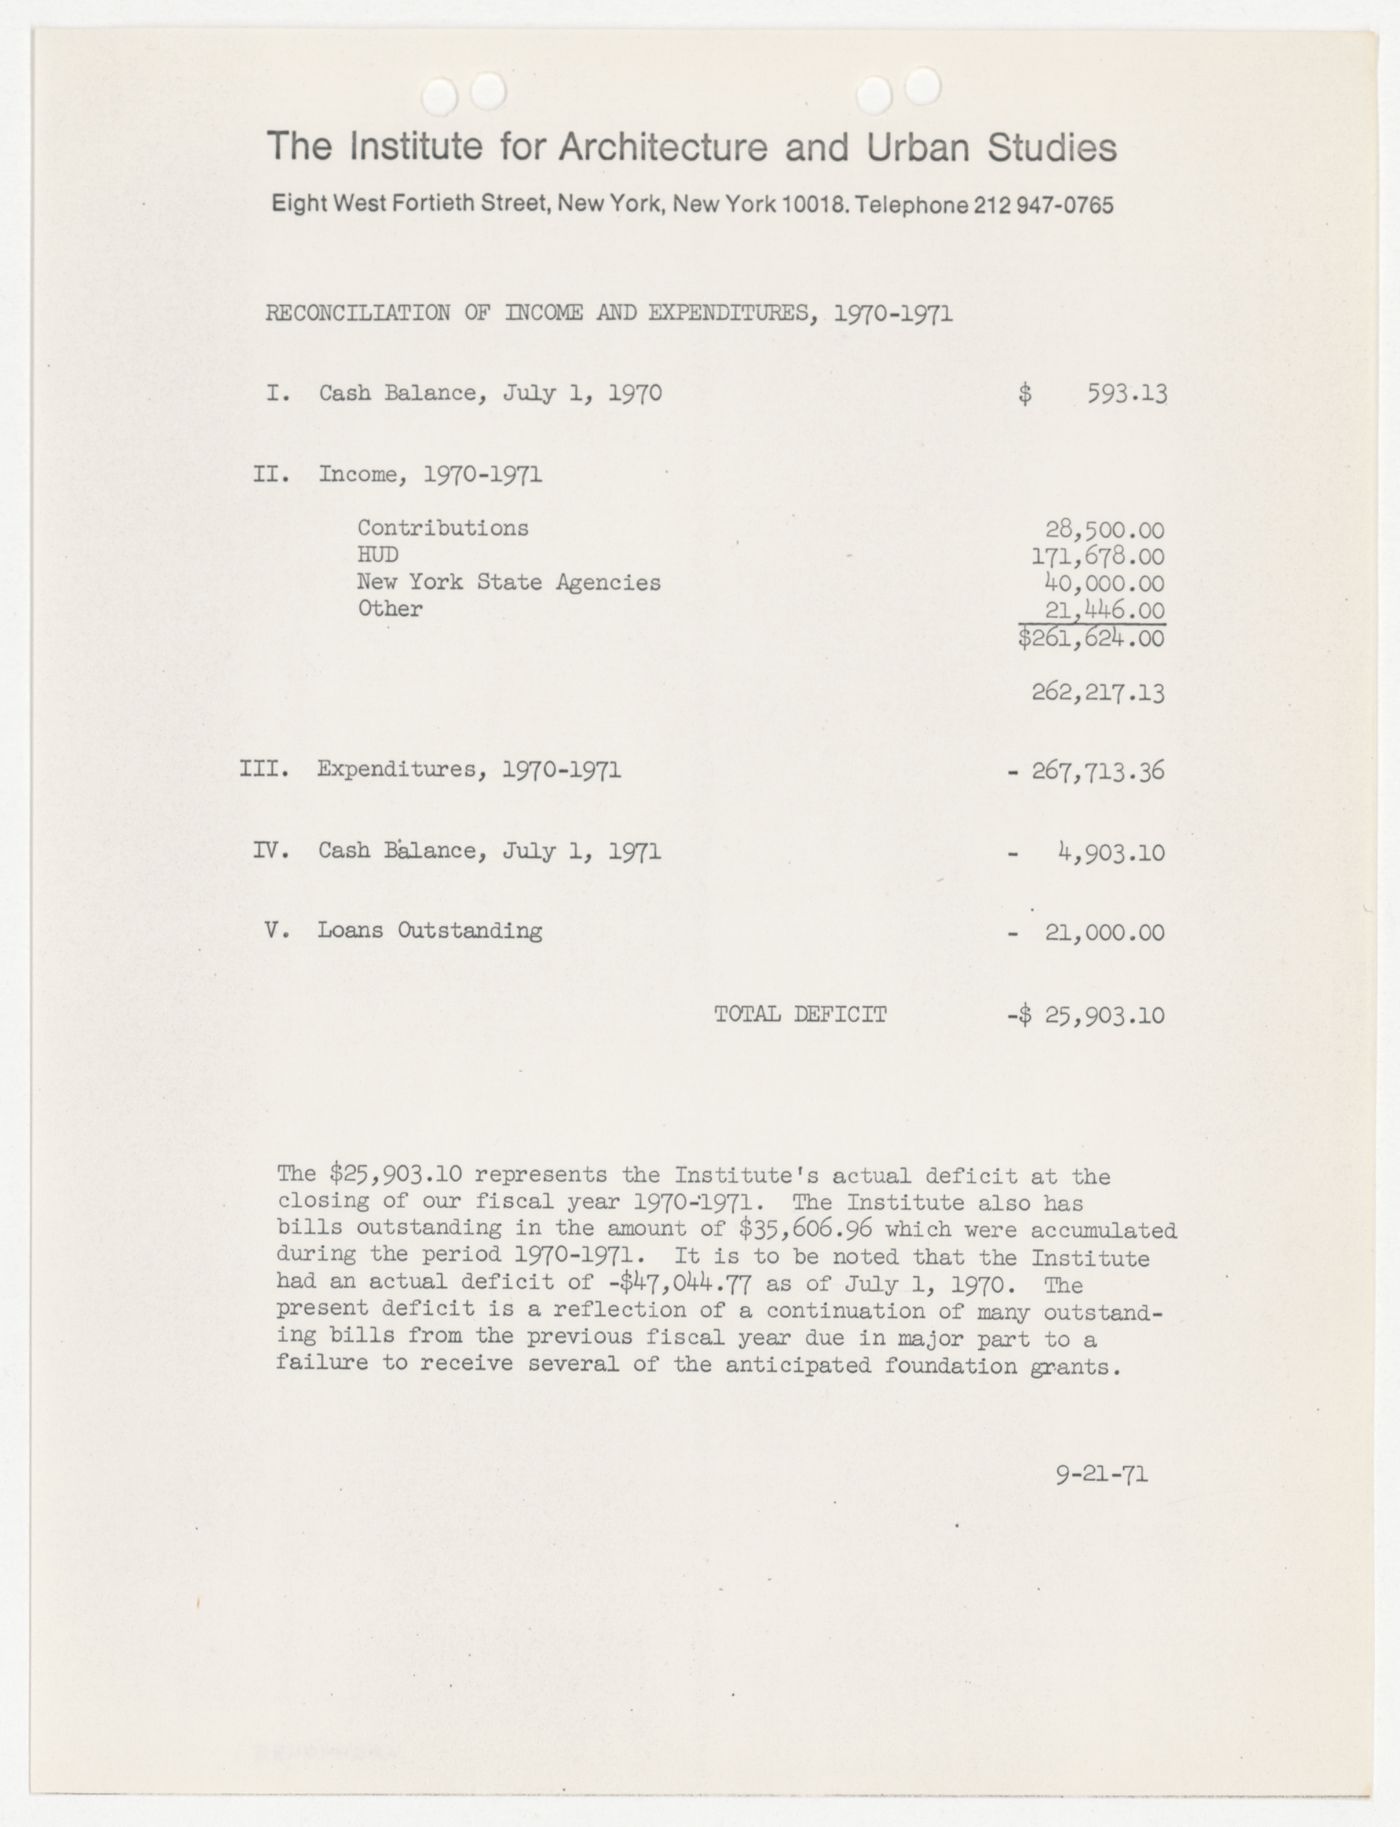 Reconciliation of income and expenditures for financial year 1970-1971